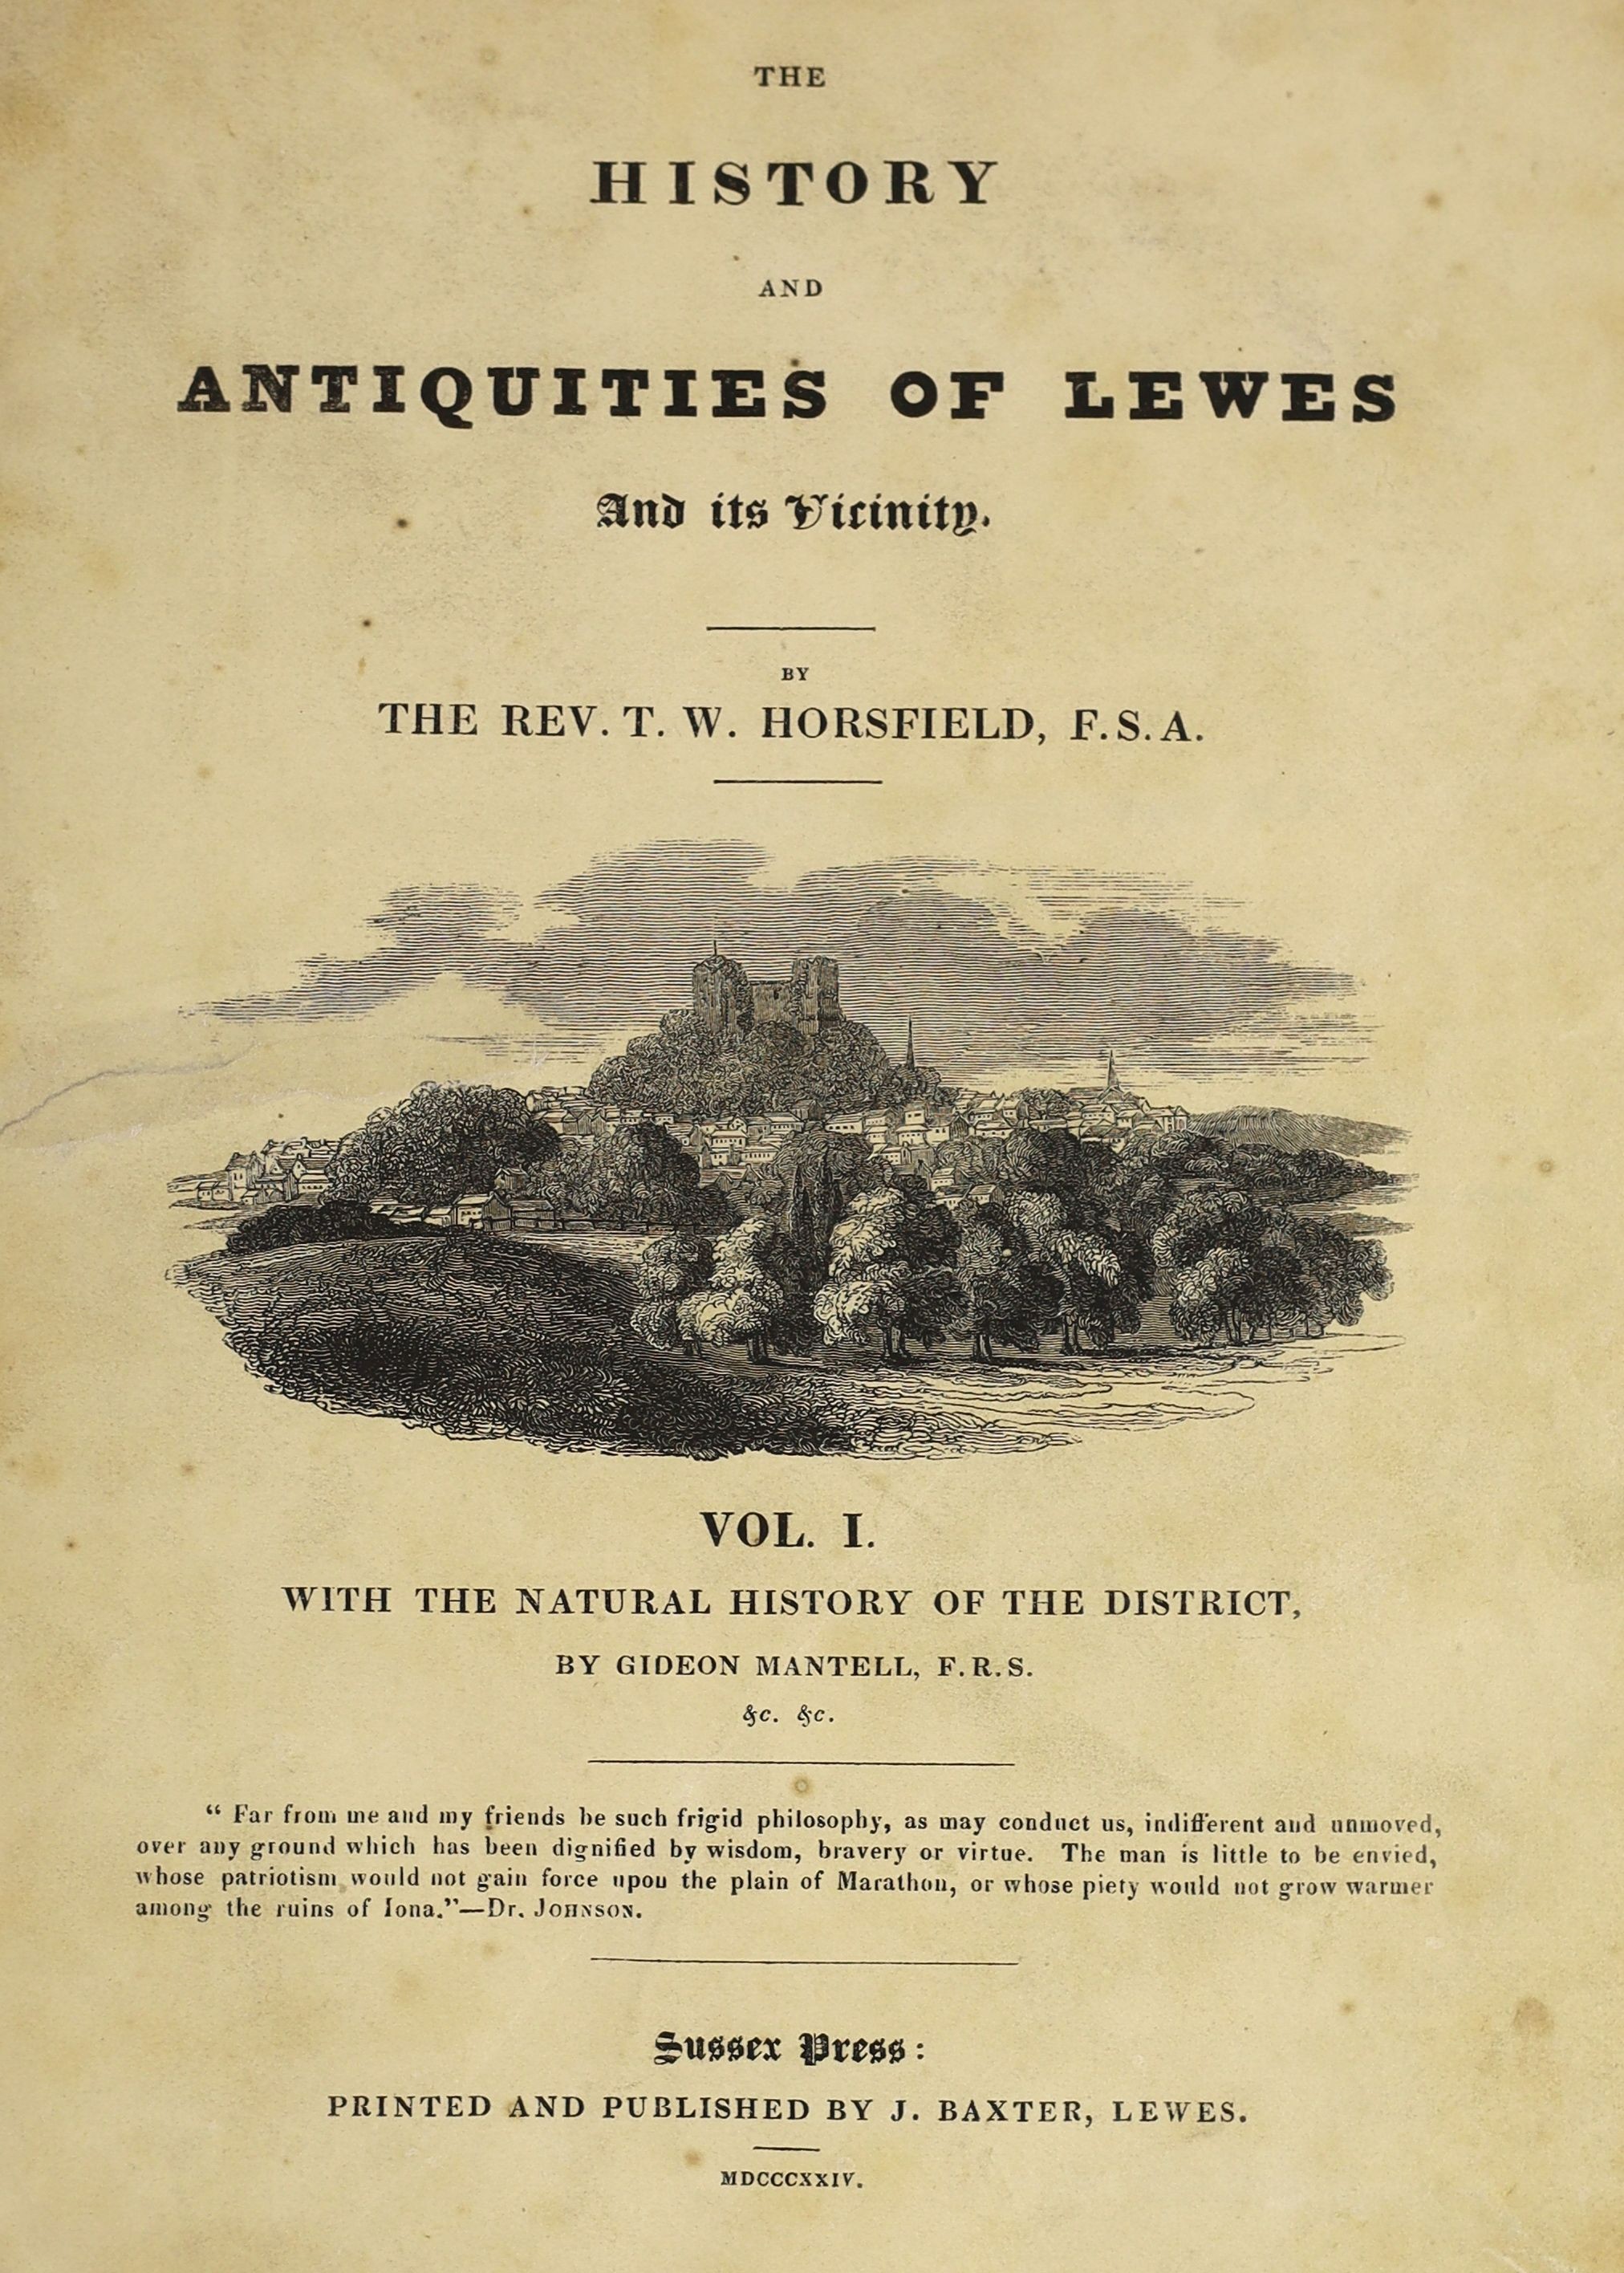 Horsfield, T.W. - The History and Antiquities of Lewes and its vicinity, 2 vols., first edition, folding map, 30 lithographed plates, 10 engraved plates, wood-engraved illustrations, spotted (as usual), green half calf,